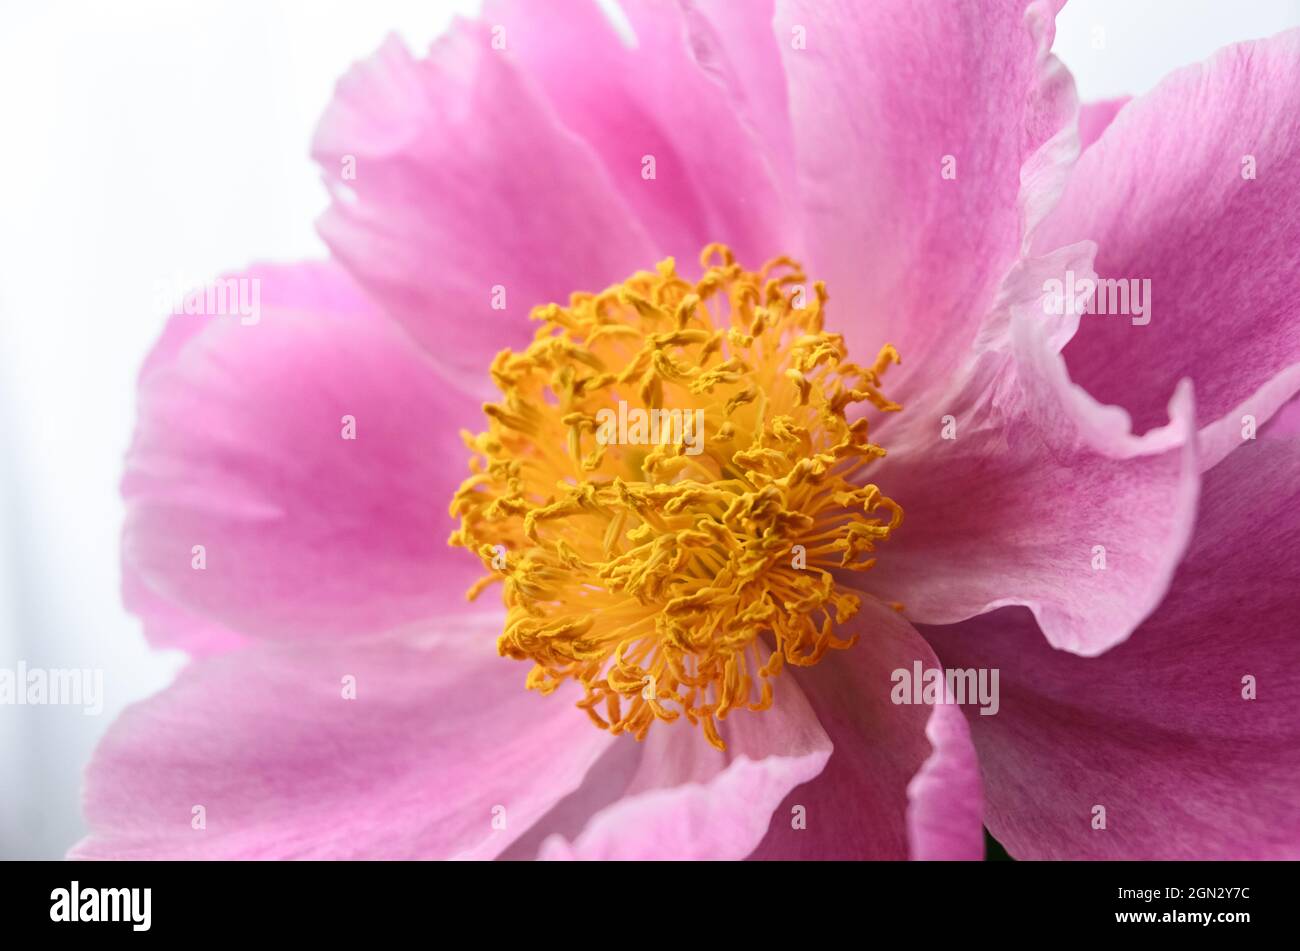 Paeonia officinalis, known as garden peony or common peony flower in the garden with pink, purple and yellow colors Stock Photo